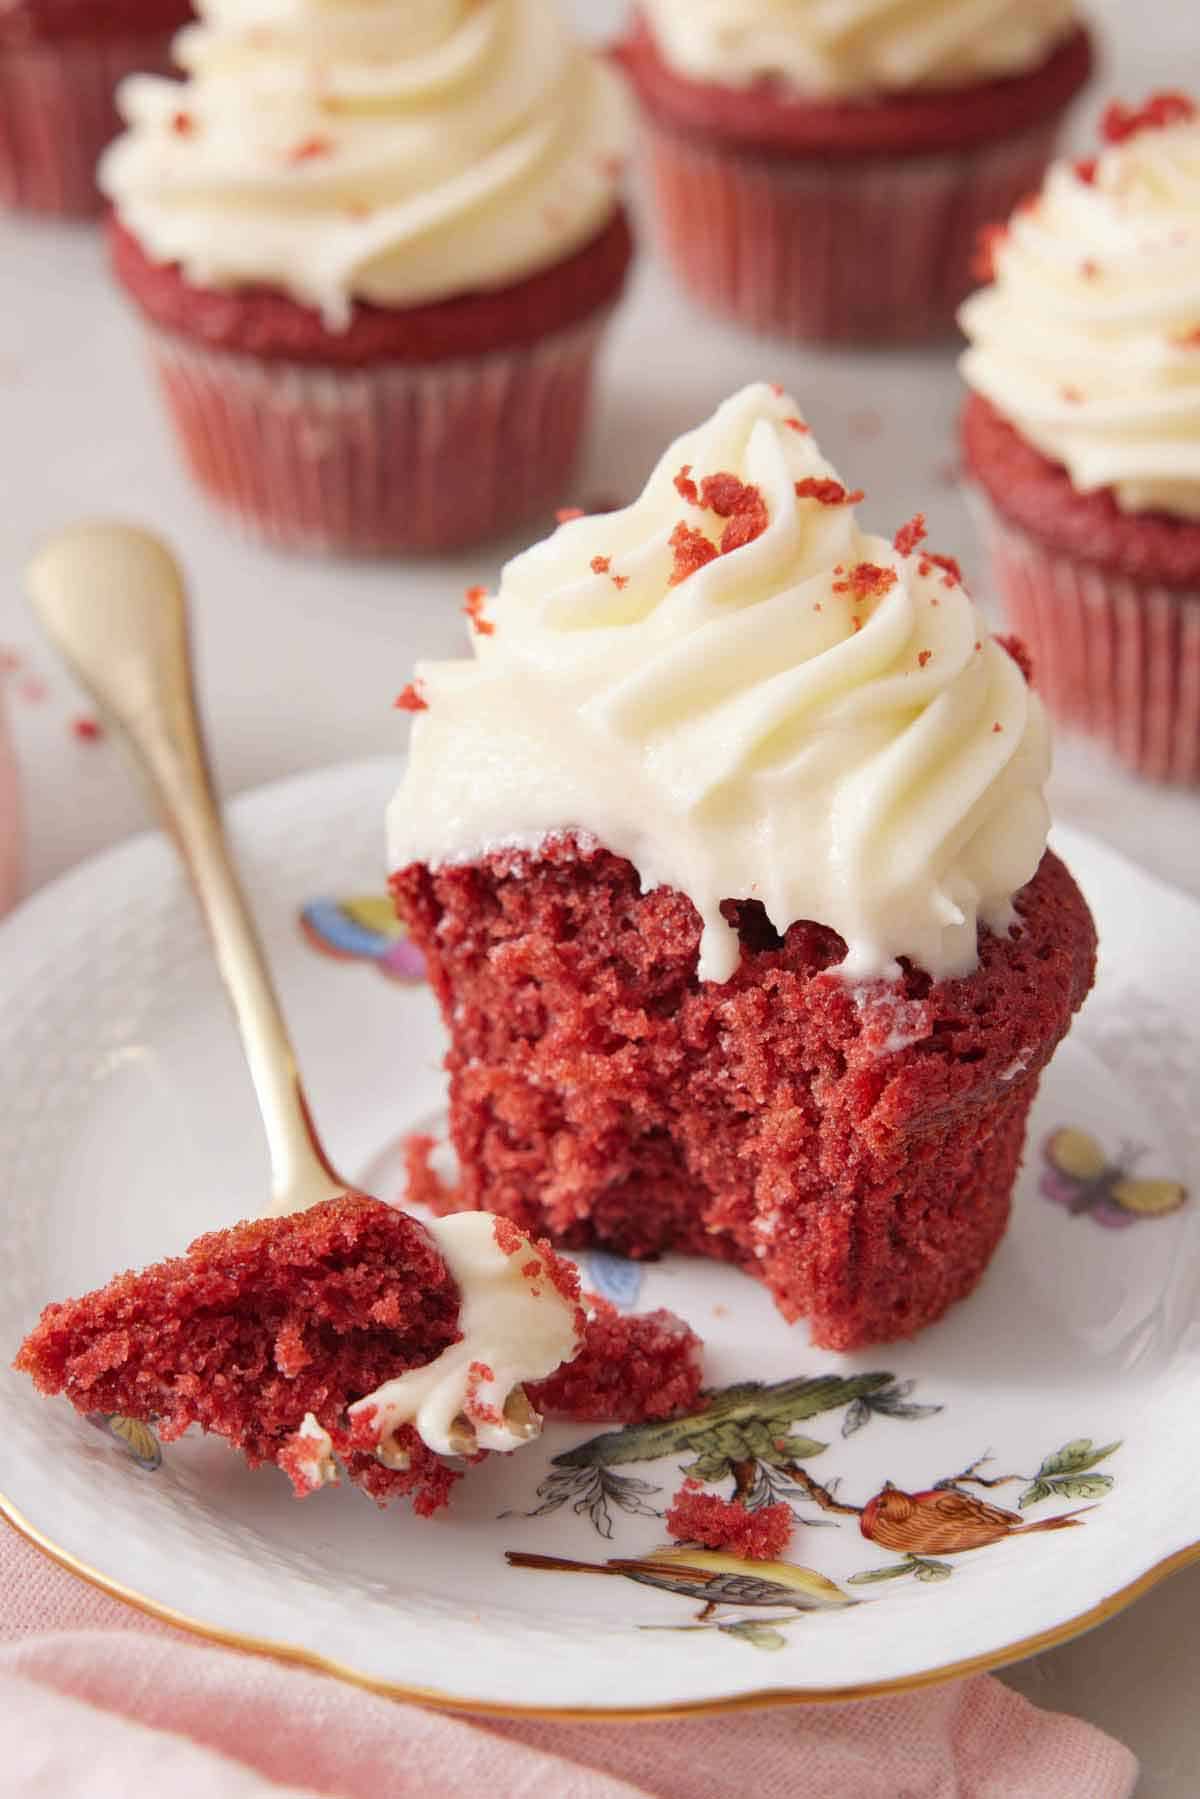 A plate with a red velvet cupcake, half eaten, with a bite on a fork.